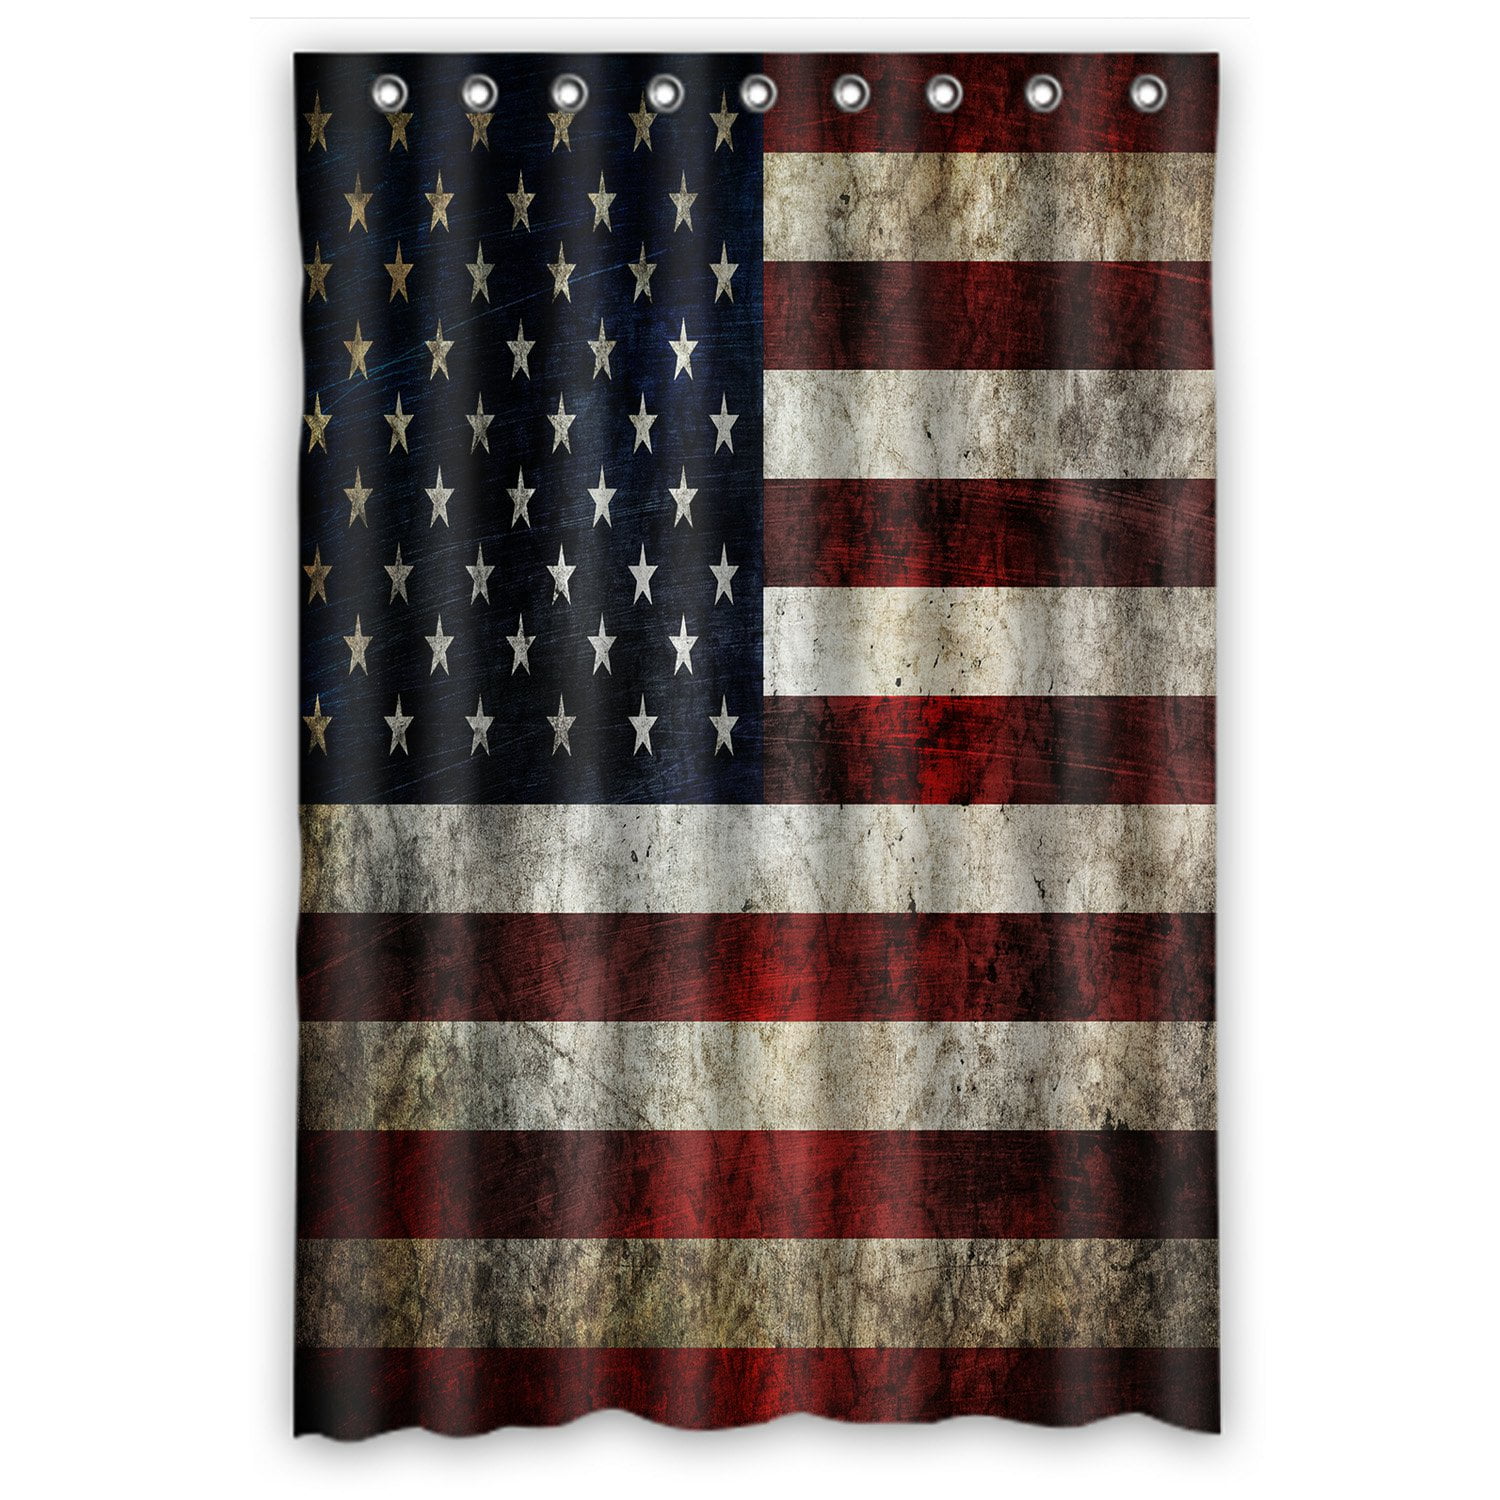 Details about   July 4th American Flag Stars Wood Plank Waterproof Fabric Shower Curtain Set 72" 